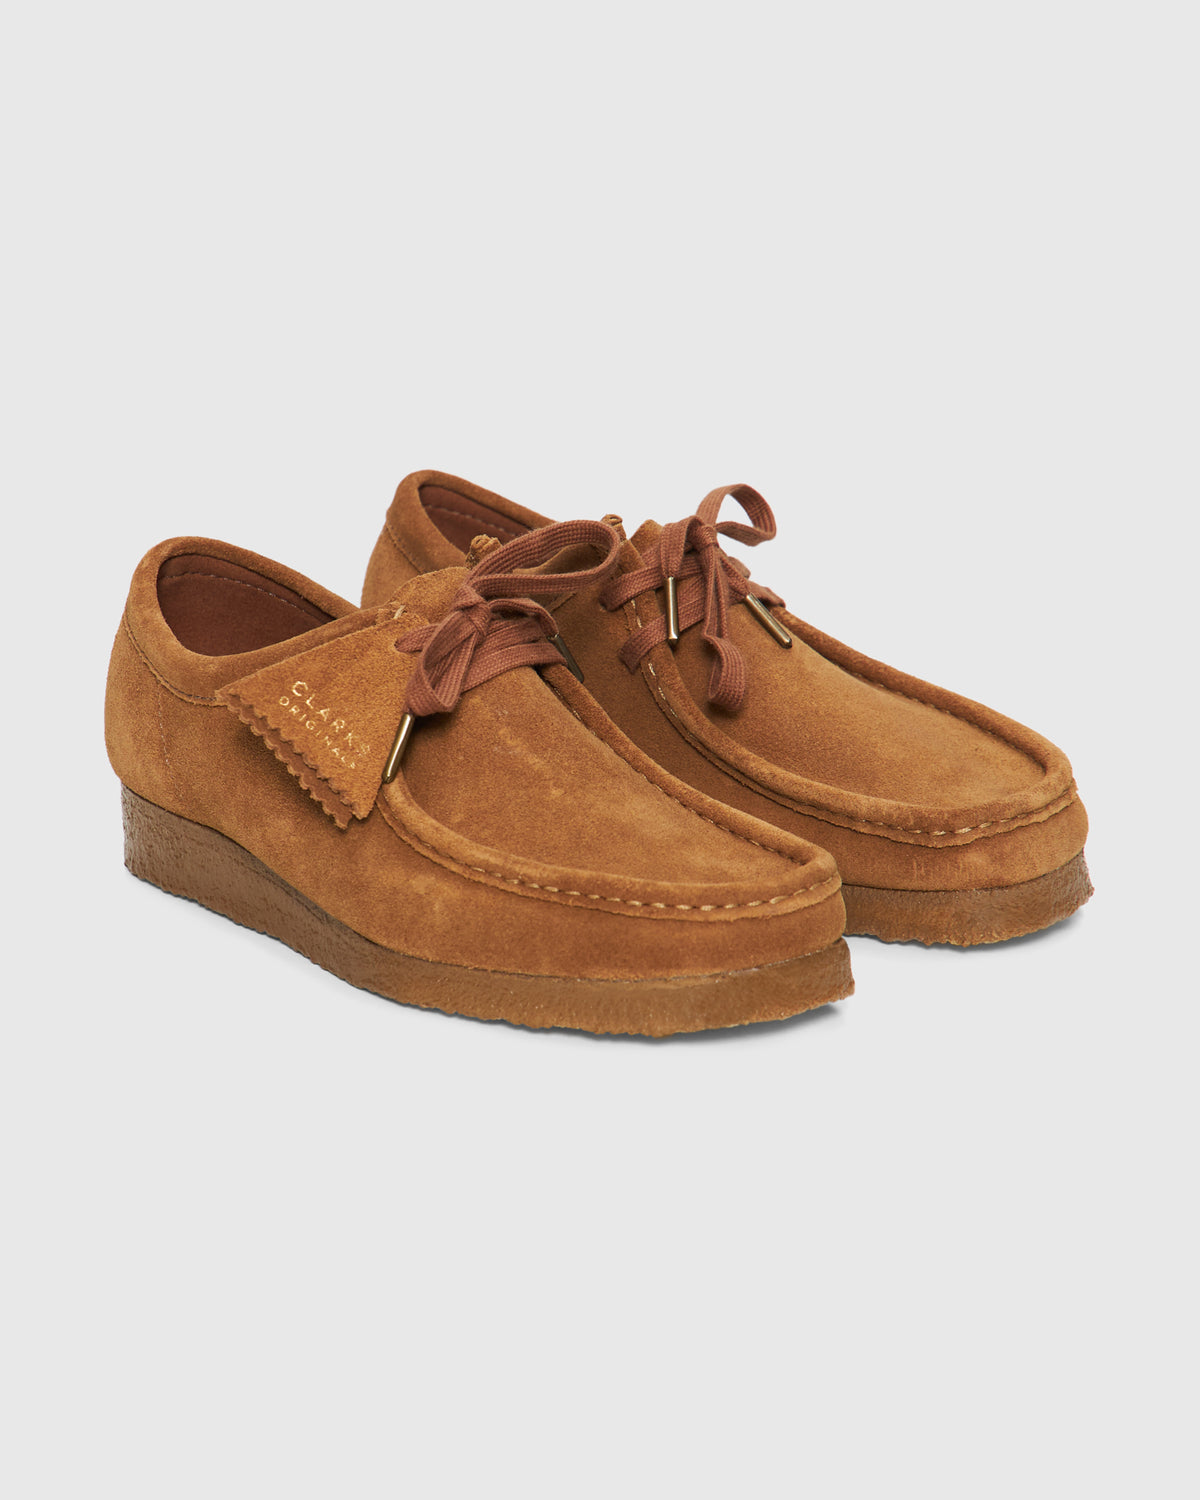 Wallabee in Cola